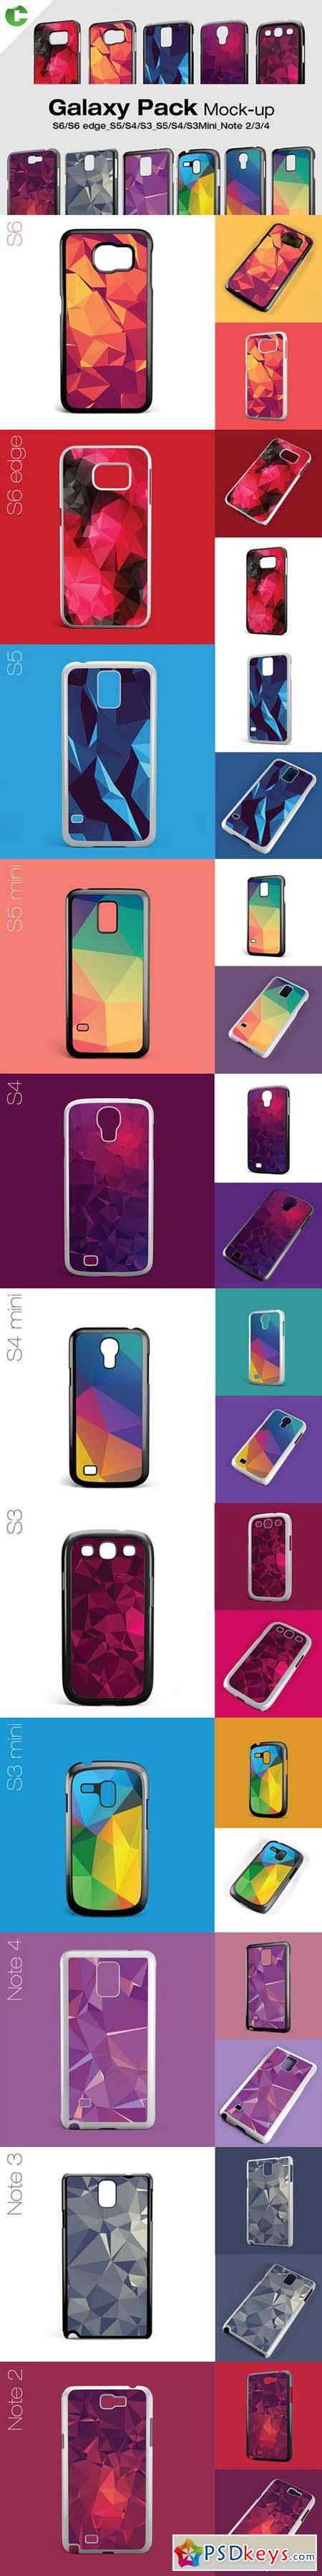 Galaxy Pack Case Mock-Up 490645